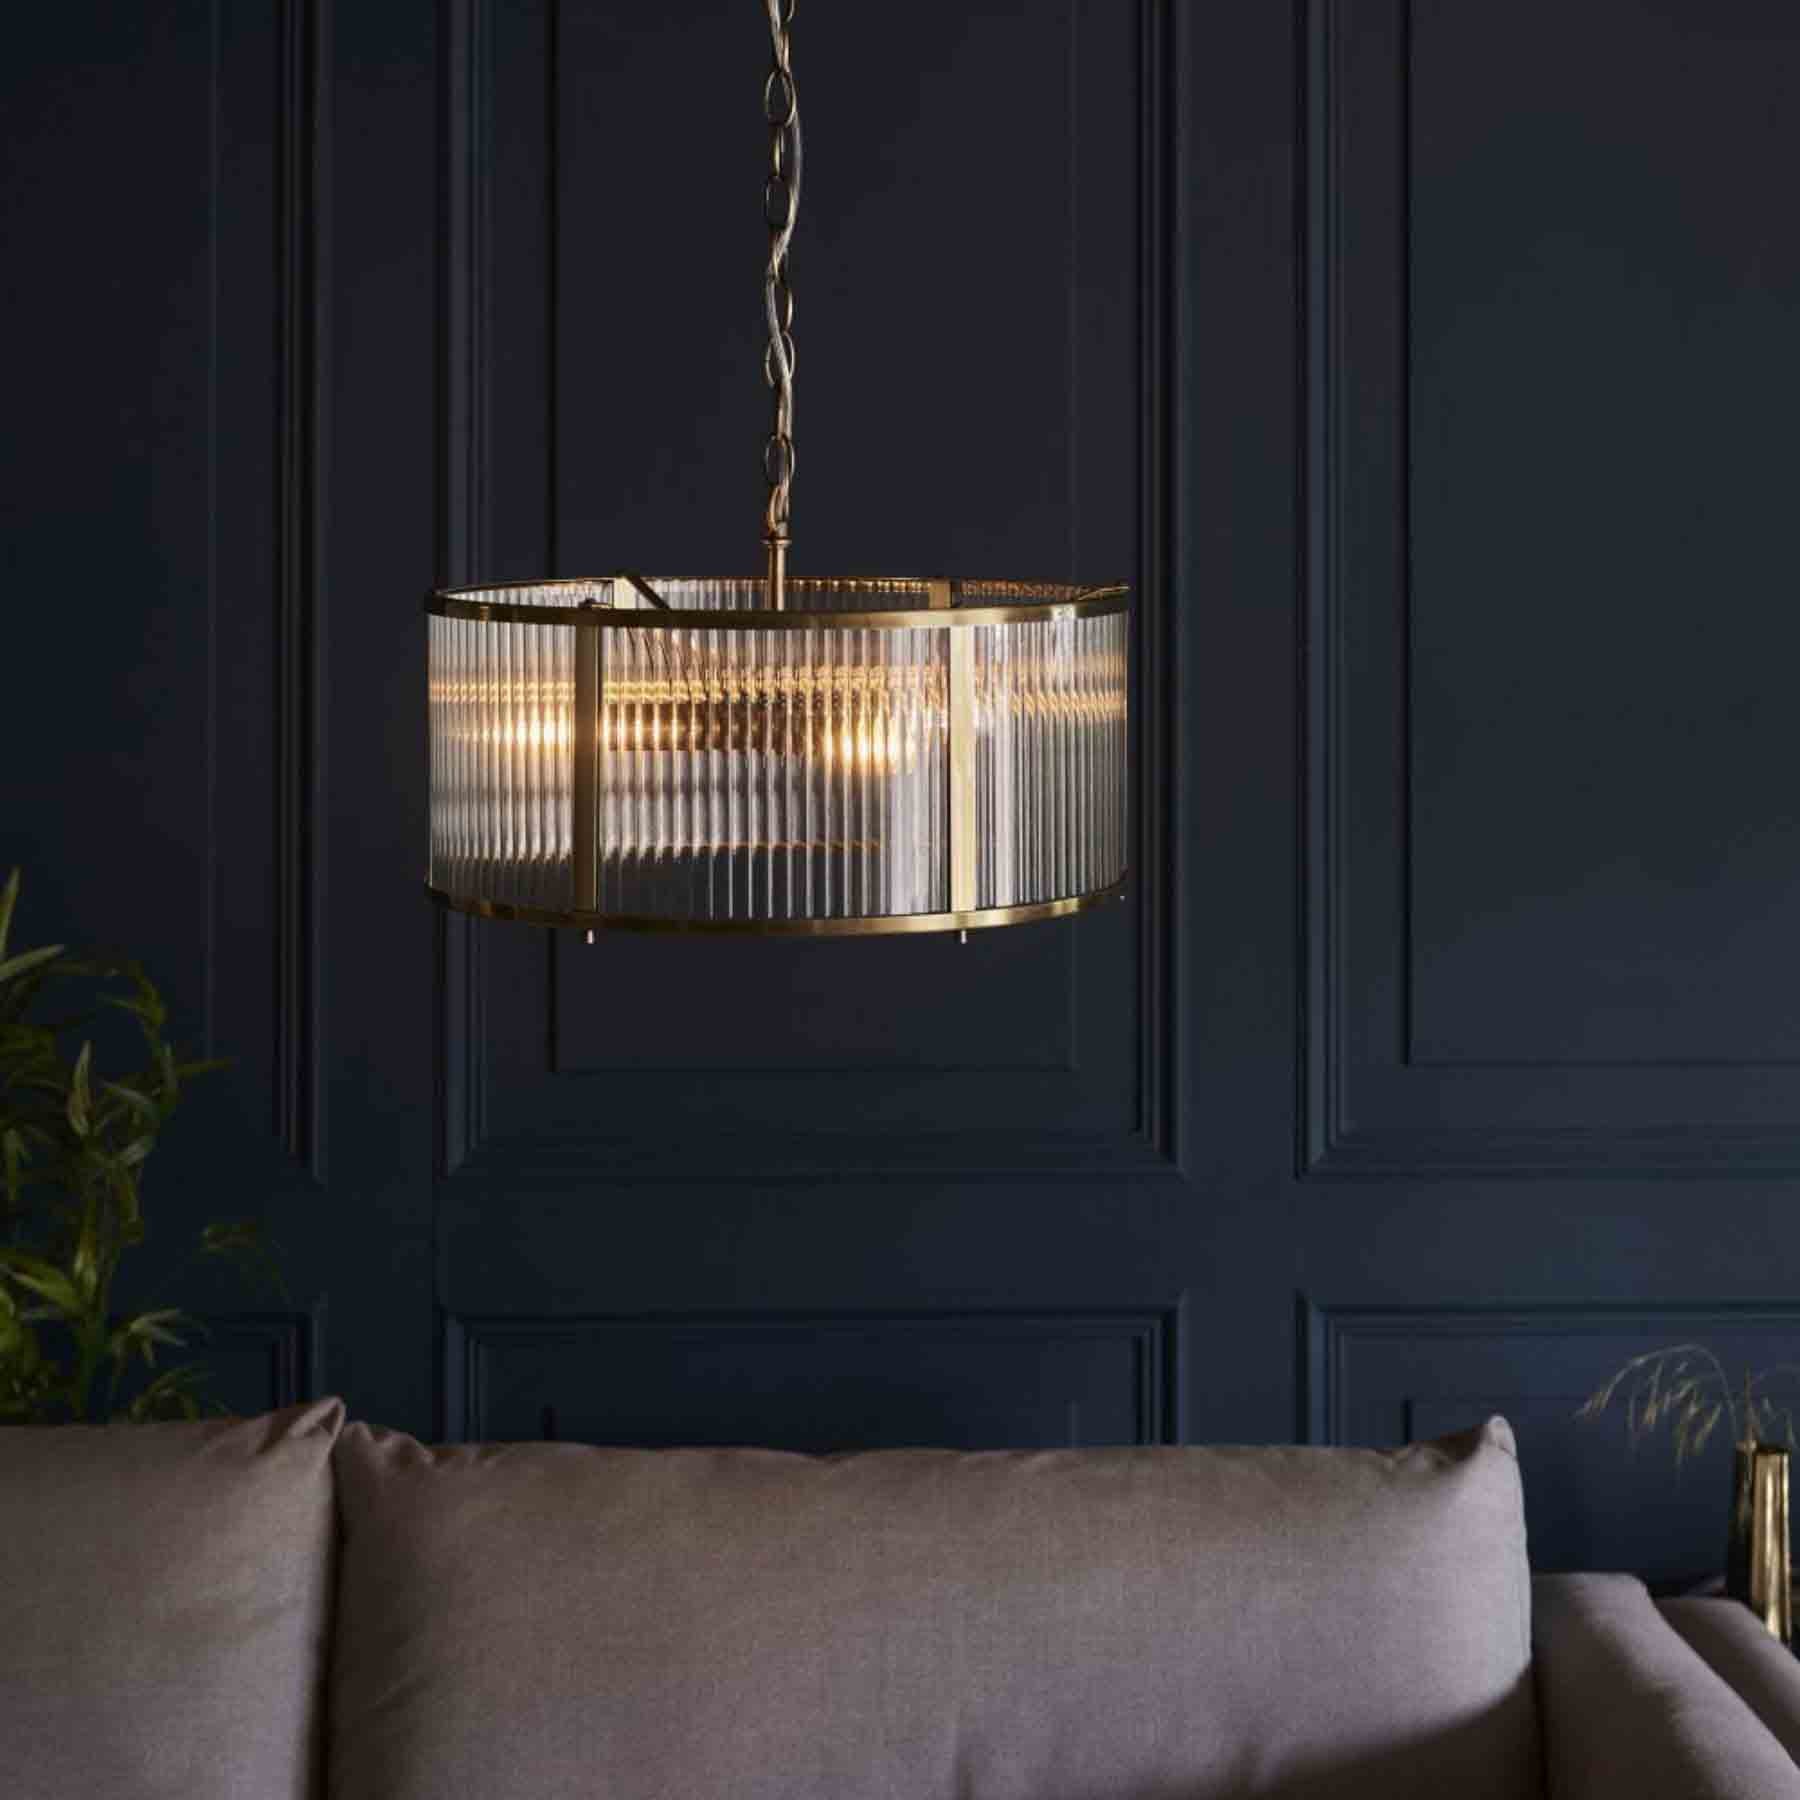 consider a coordinated appearance by pairing it with a complementary flush light